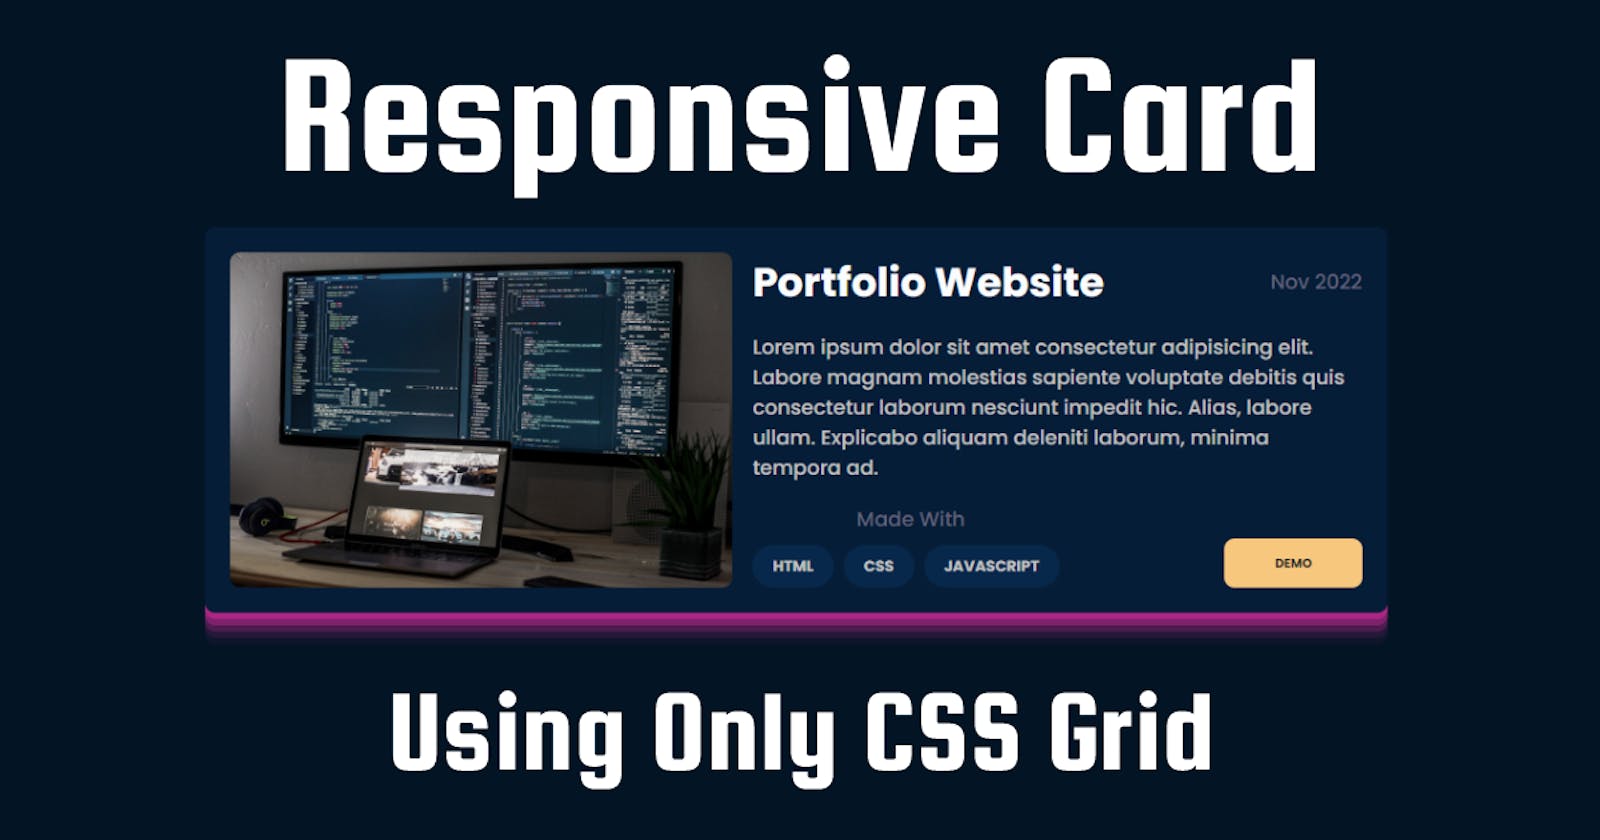 How To make Responsive Card With only CSS Grid